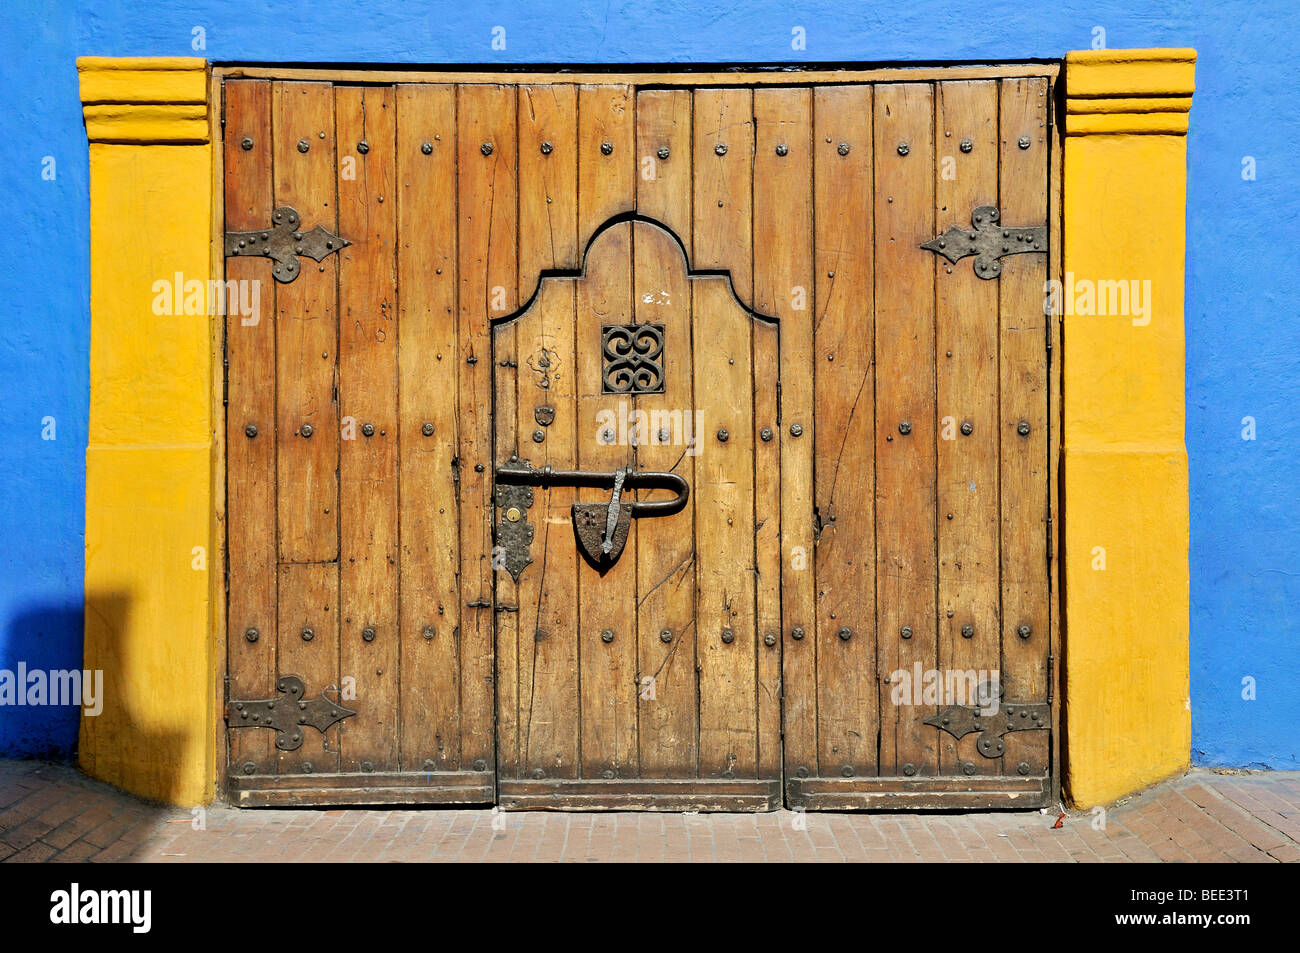 Old wooden gate, La Candelaria district, Bogotá, Colombia, South America Stock Photo